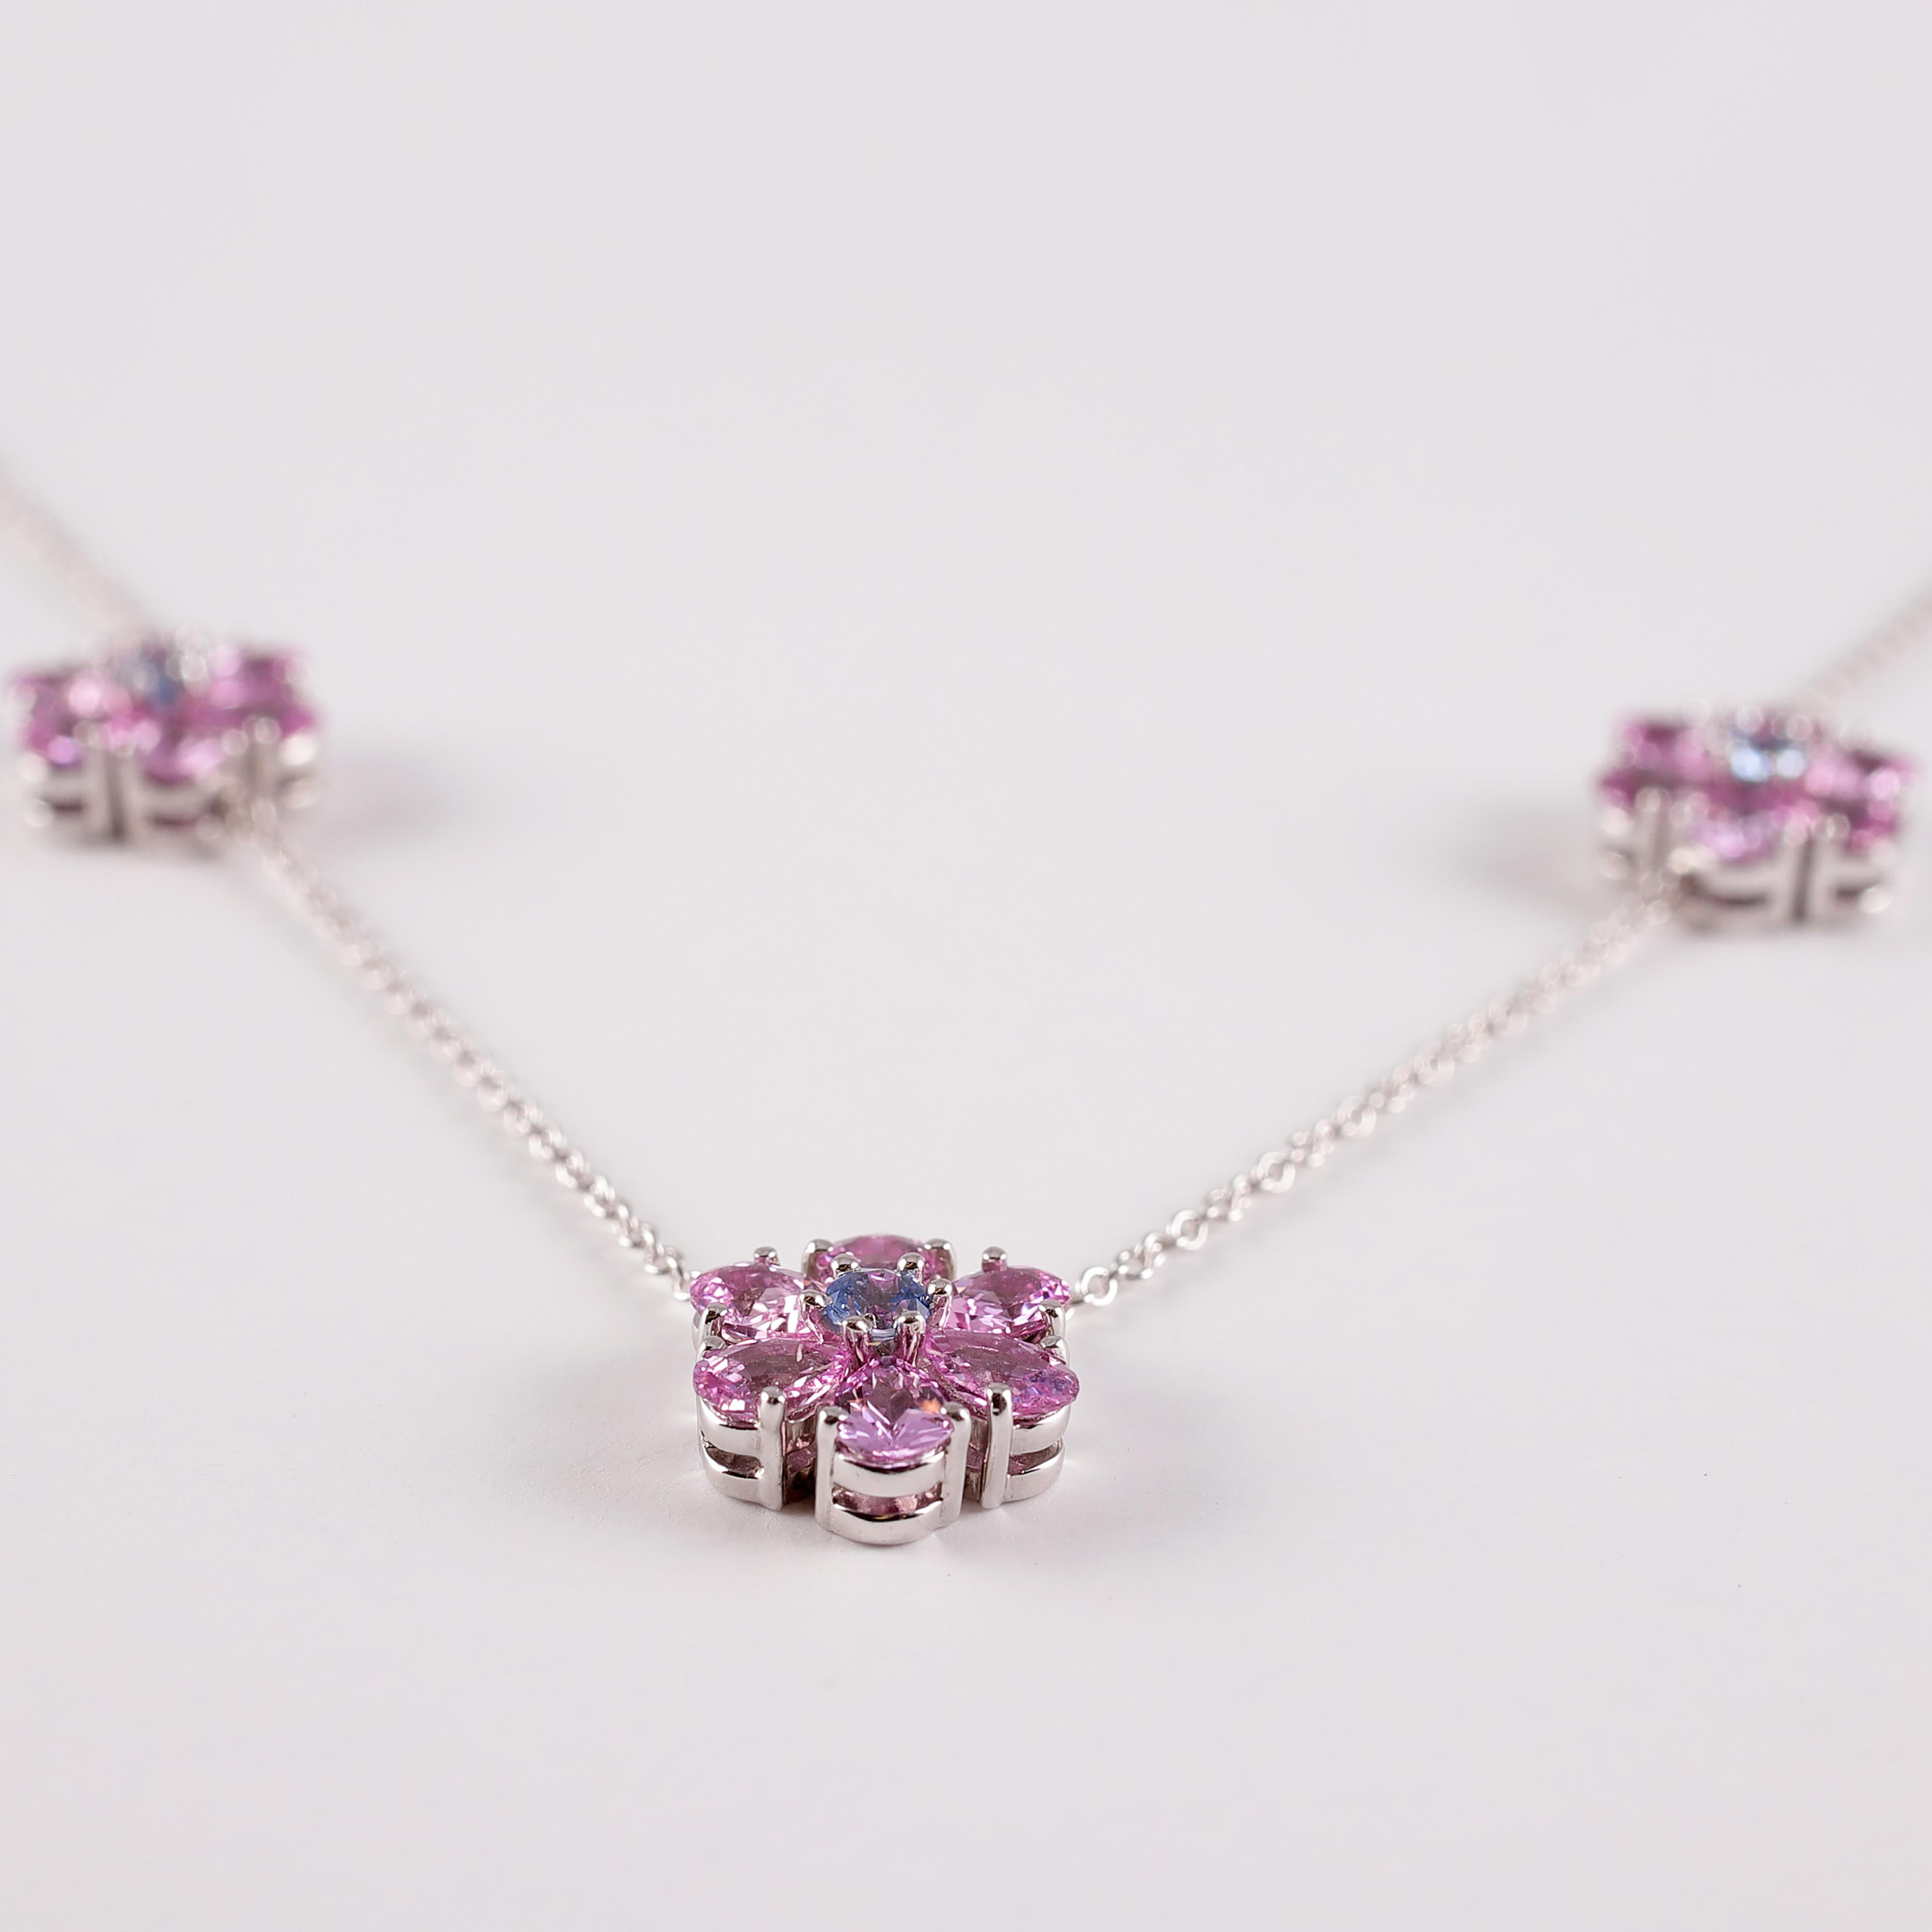 A fun and flirty look for any age!! This platinum, interlocking link necklace is secured with a spring ring clasp and suspends flower three stations that support a total of 3.00 carats pink sapphires and 0.15 carats blue sapphires .  